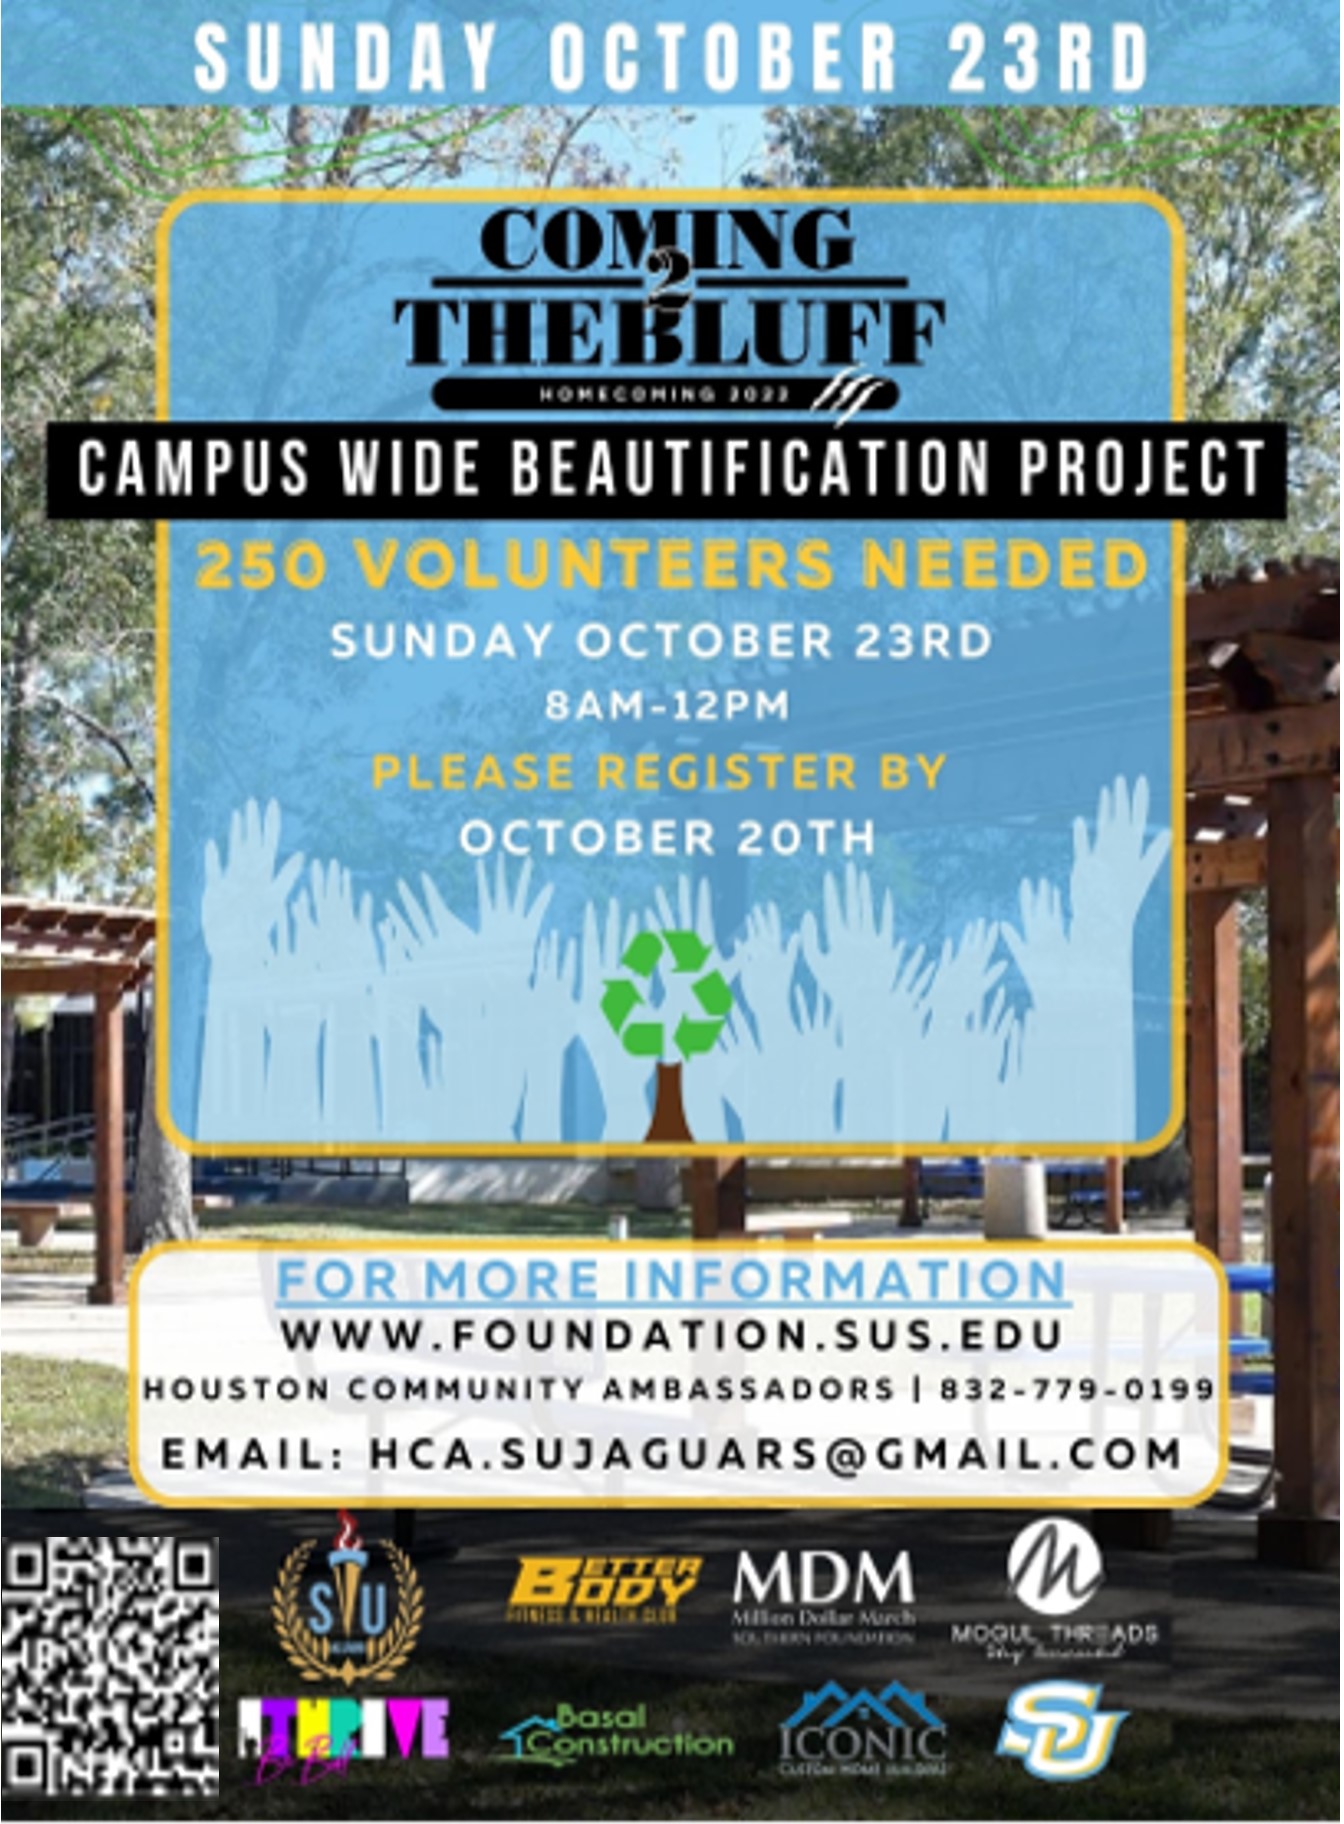 Campus Wide Beautification Project